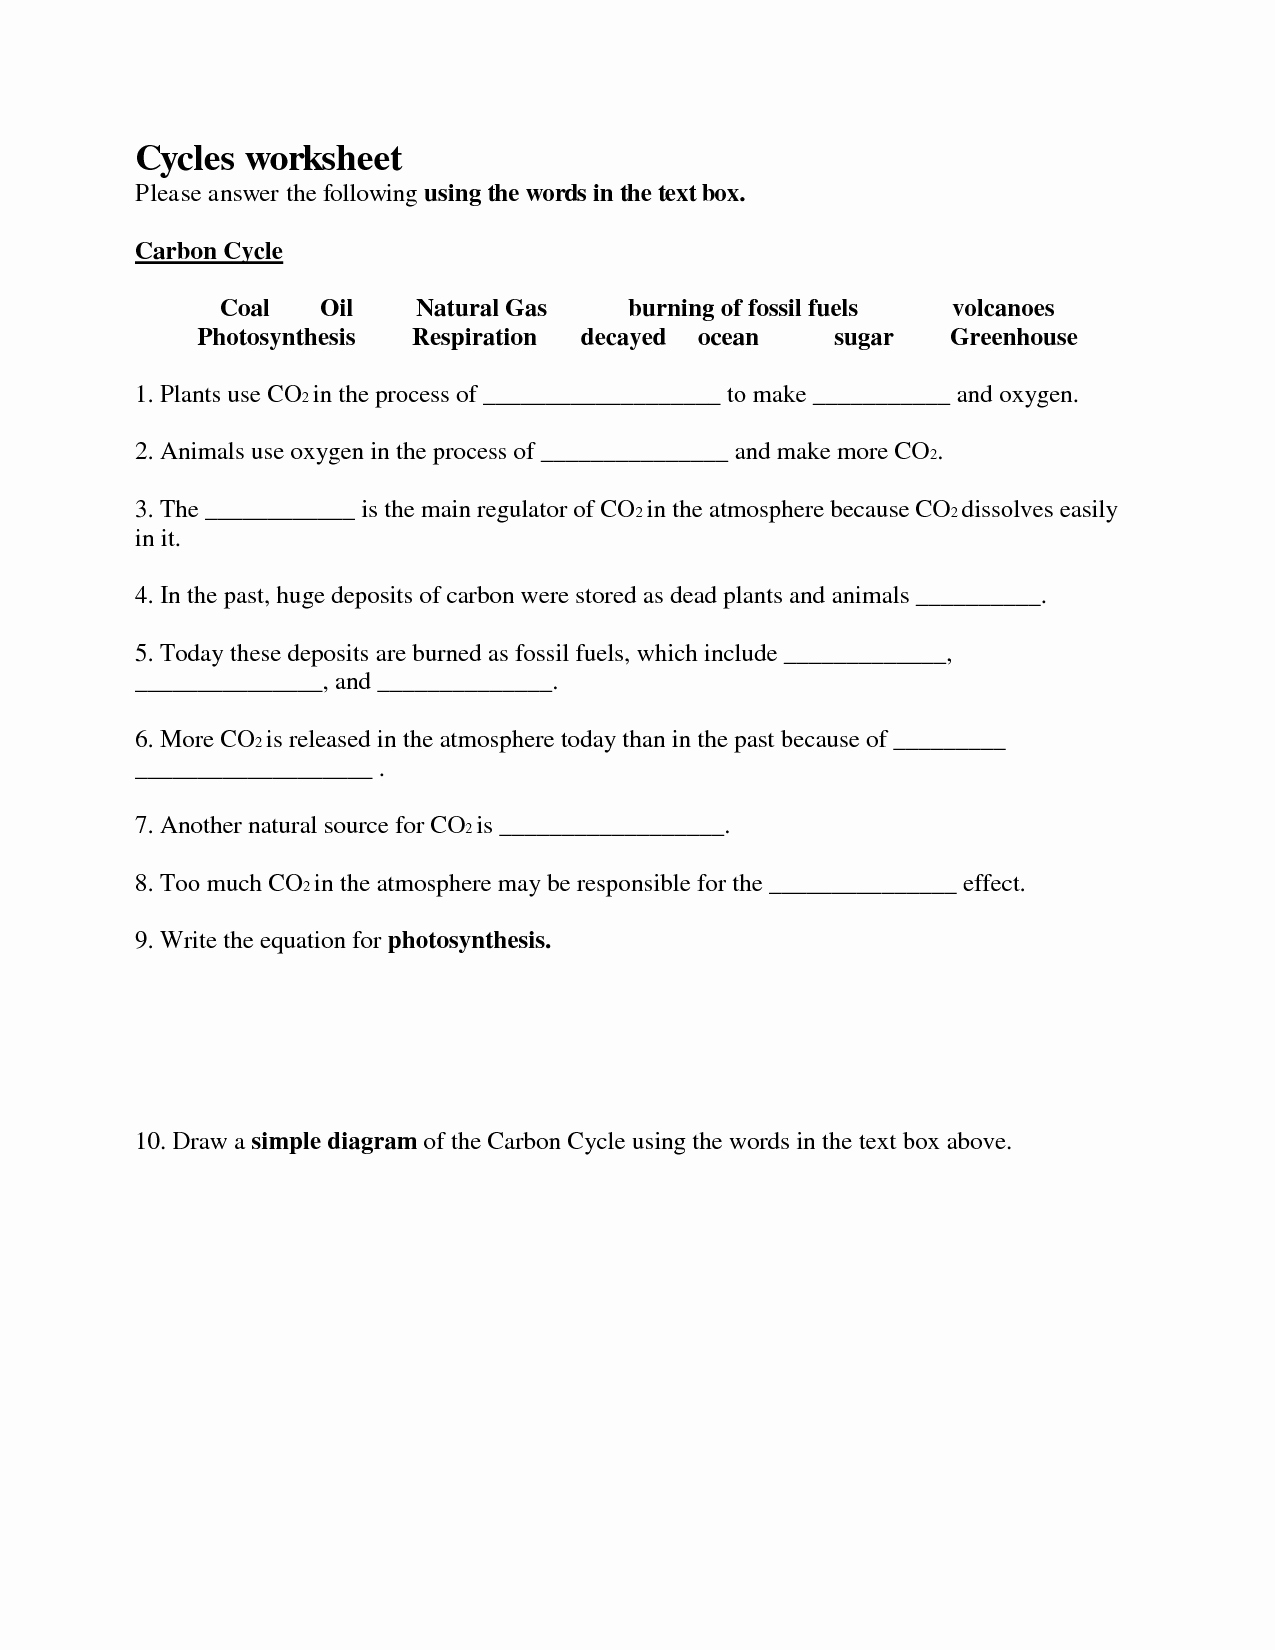 Nitrogen Cycle Worksheet Answers New Worksheets Cycles Worksheet Answers Cheatslist Free